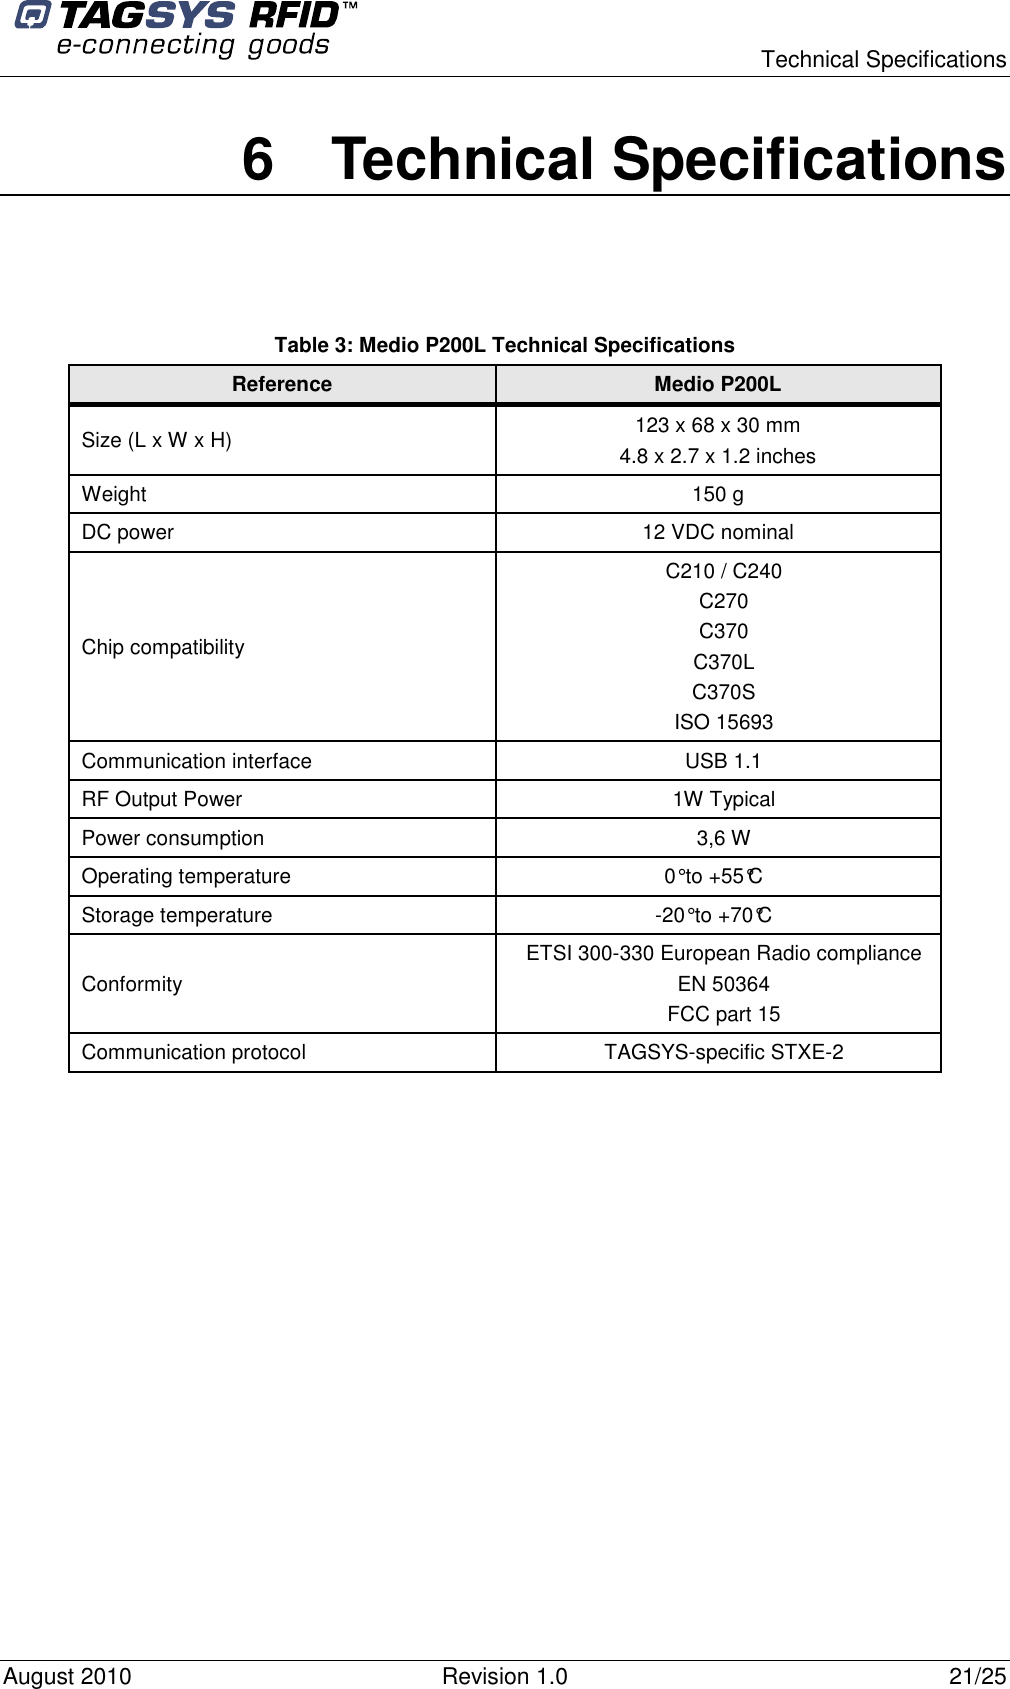  Technical Specifications August 2010  Revision 1.0  21/25 6  Technical Specifications   Table 3: Medio P200L Technical Specifications Reference  Medio P200L Size (L x W x H)  123 x 68 x 30 mm 4.8 x 2.7 x 1.2 inches Weight  150 g DC power  12 VDC nominal Chip compatibility C210 / C240 C270 C370 C370L C370S ISO 15693 Communication interface  USB 1.1  RF Output Power  1W Typical Power consumption   3,6 W Operating temperature  0° to +55°C Storage temperature  -20° to +70°C Conformity ETSI 300-330 European Radio compliance EN 50364 FCC part 15 Communication protocol  TAGSYS-specific STXE-2   